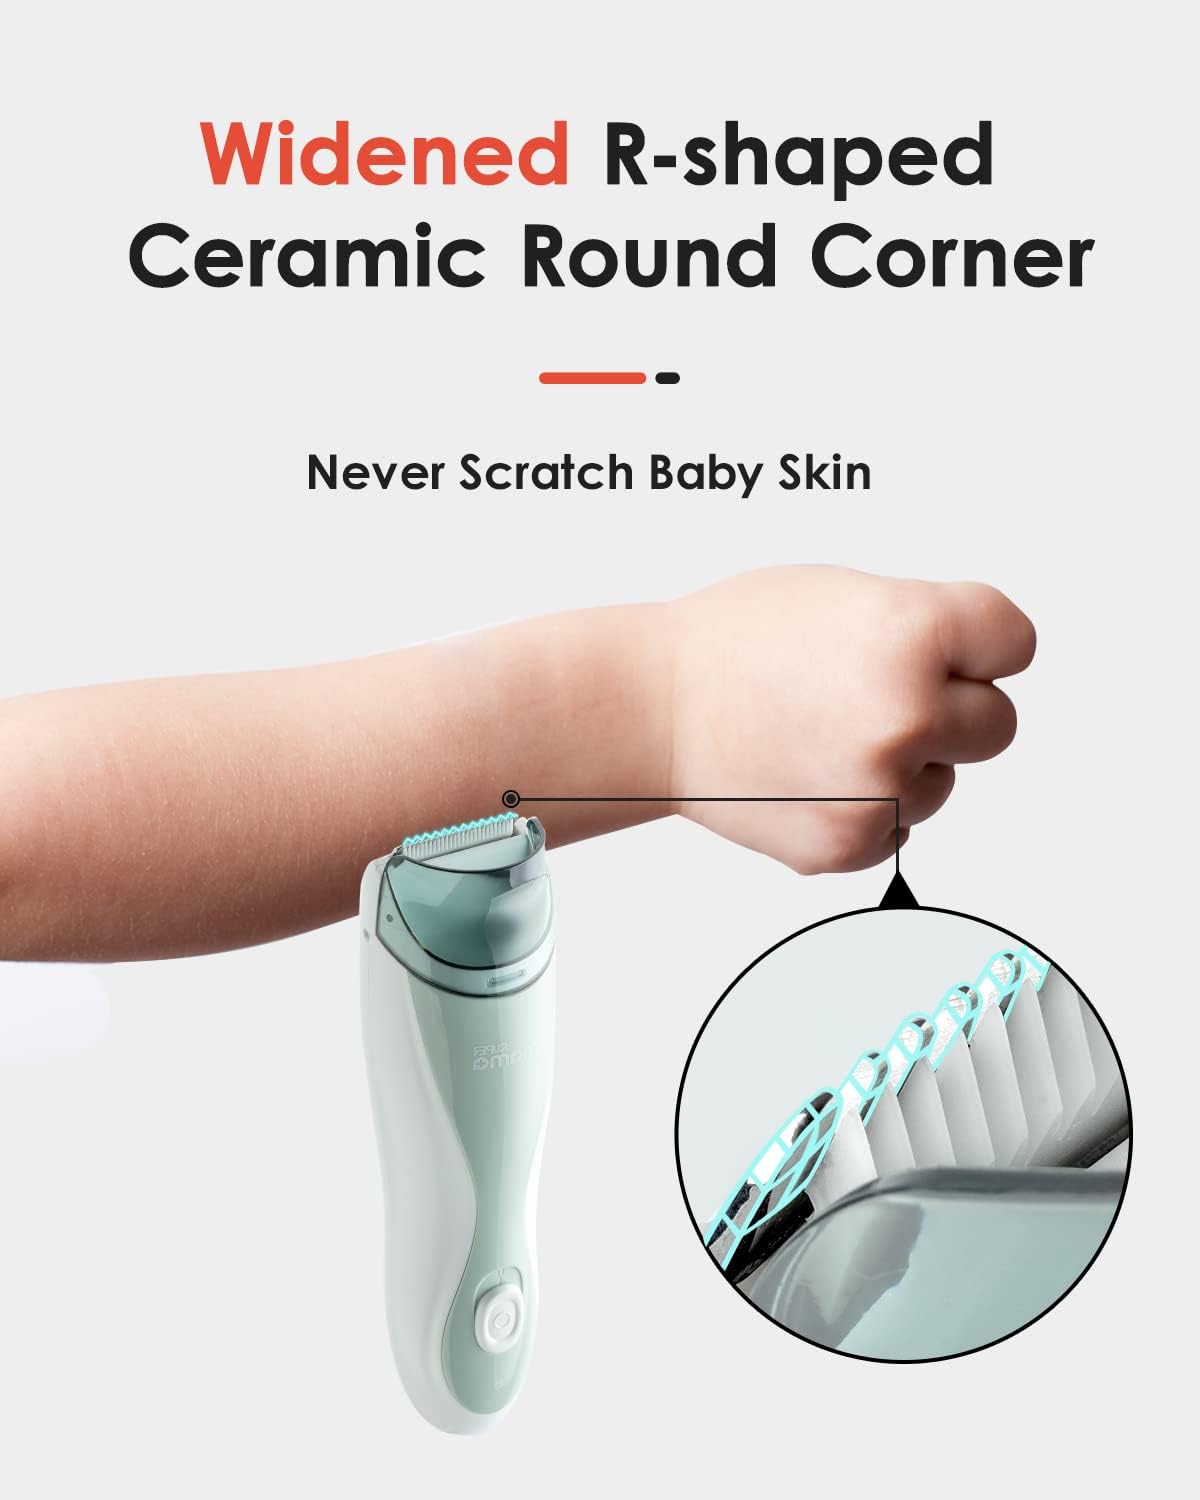 SuperMama 10-in-1 Baby Hair Clipper - Buy SuperMama 10-in-1 Baby Hair Clipper in Dubai - HOCC Dubai - Baby playground outdoor - Shop baby product - Shop Pet product - shop home decor and lighting in Dubai - HOCC Dubai - Baby playground outddoor - Shop bab